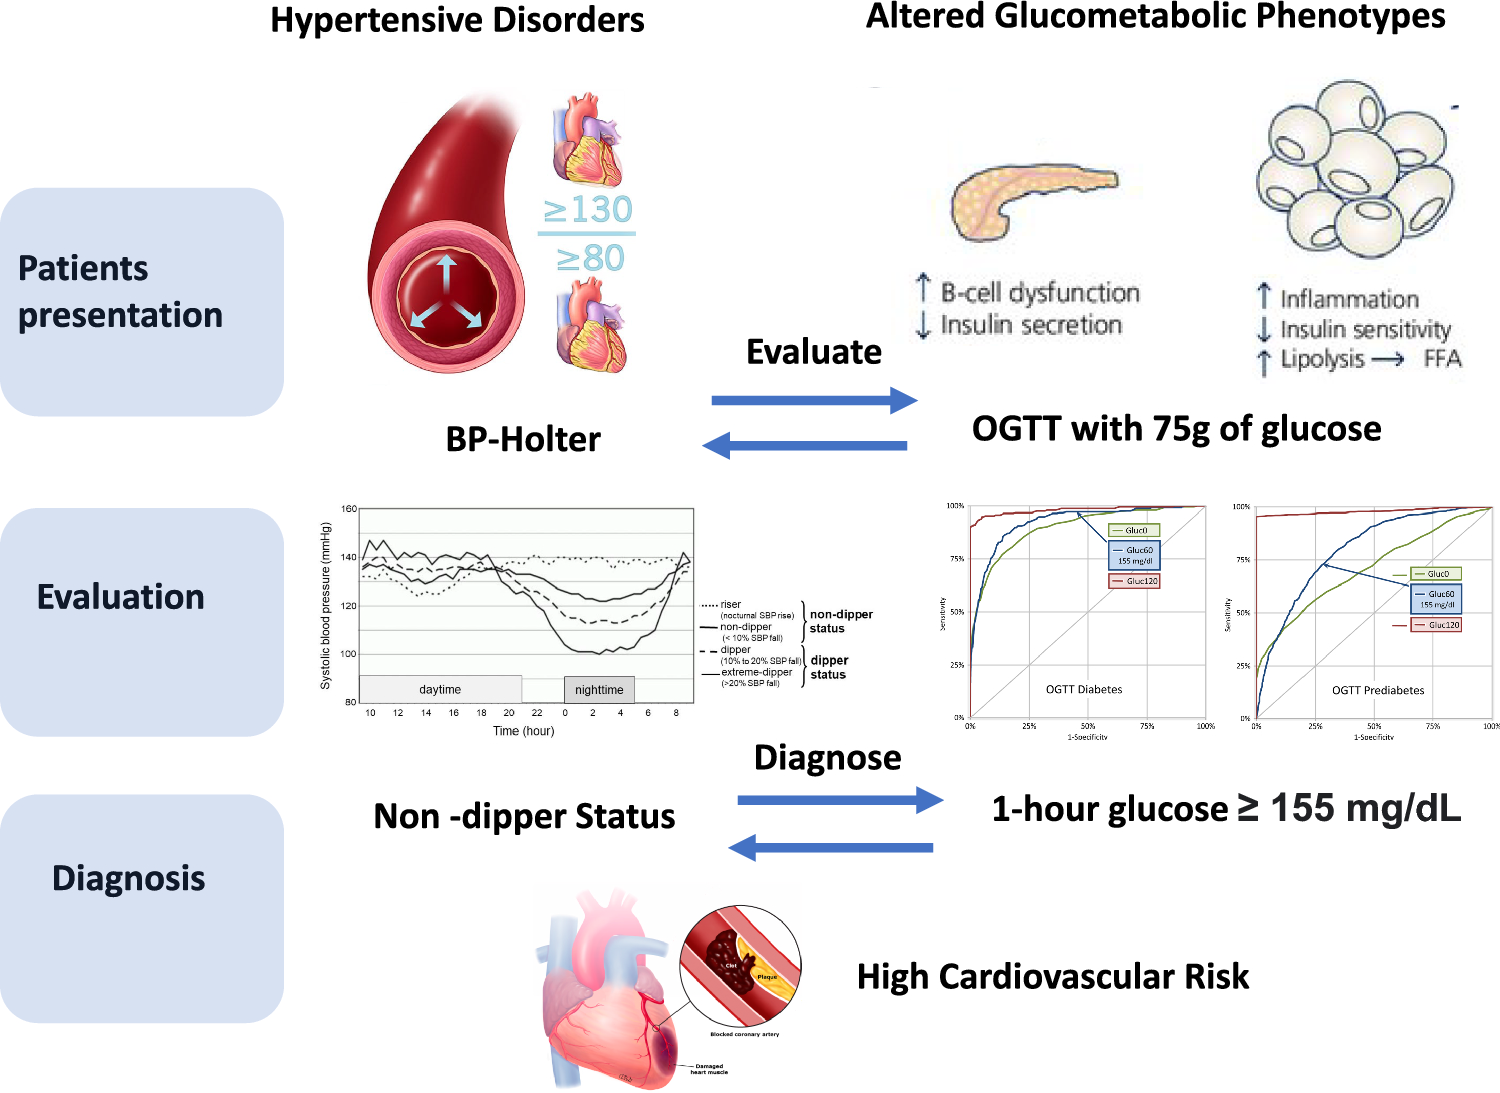 Non-dipper blood pressure pattern and glycemic alterations: does post-prandial glucose rise predict lack of nocturnal pressure drop?